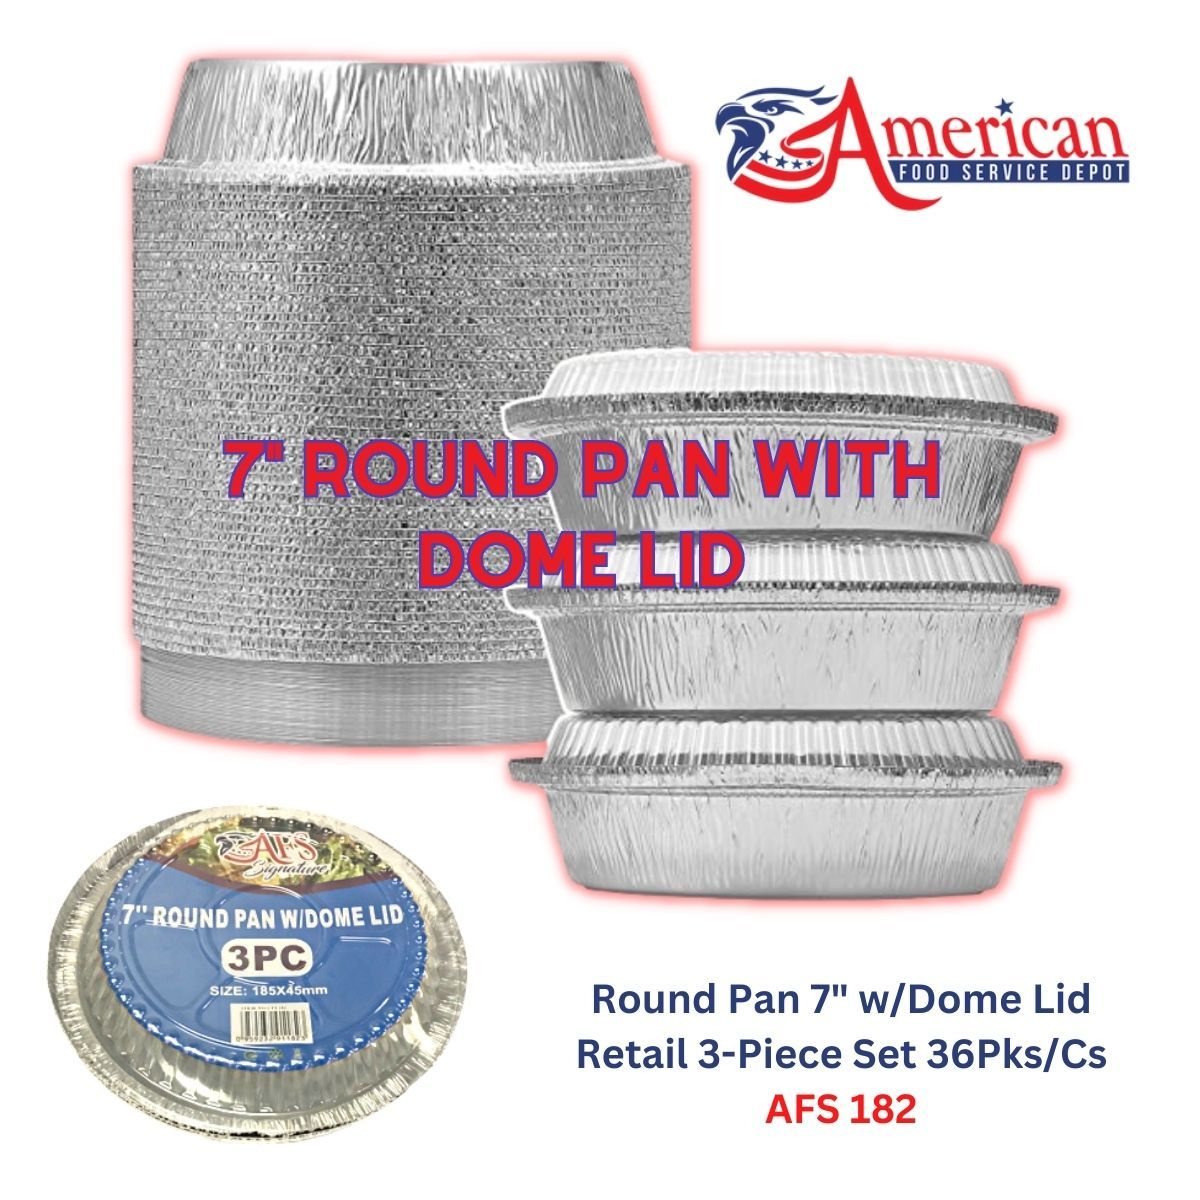 AFS - Round Pan 7" w/Dome Lid 3-Piece Set - Case of 36